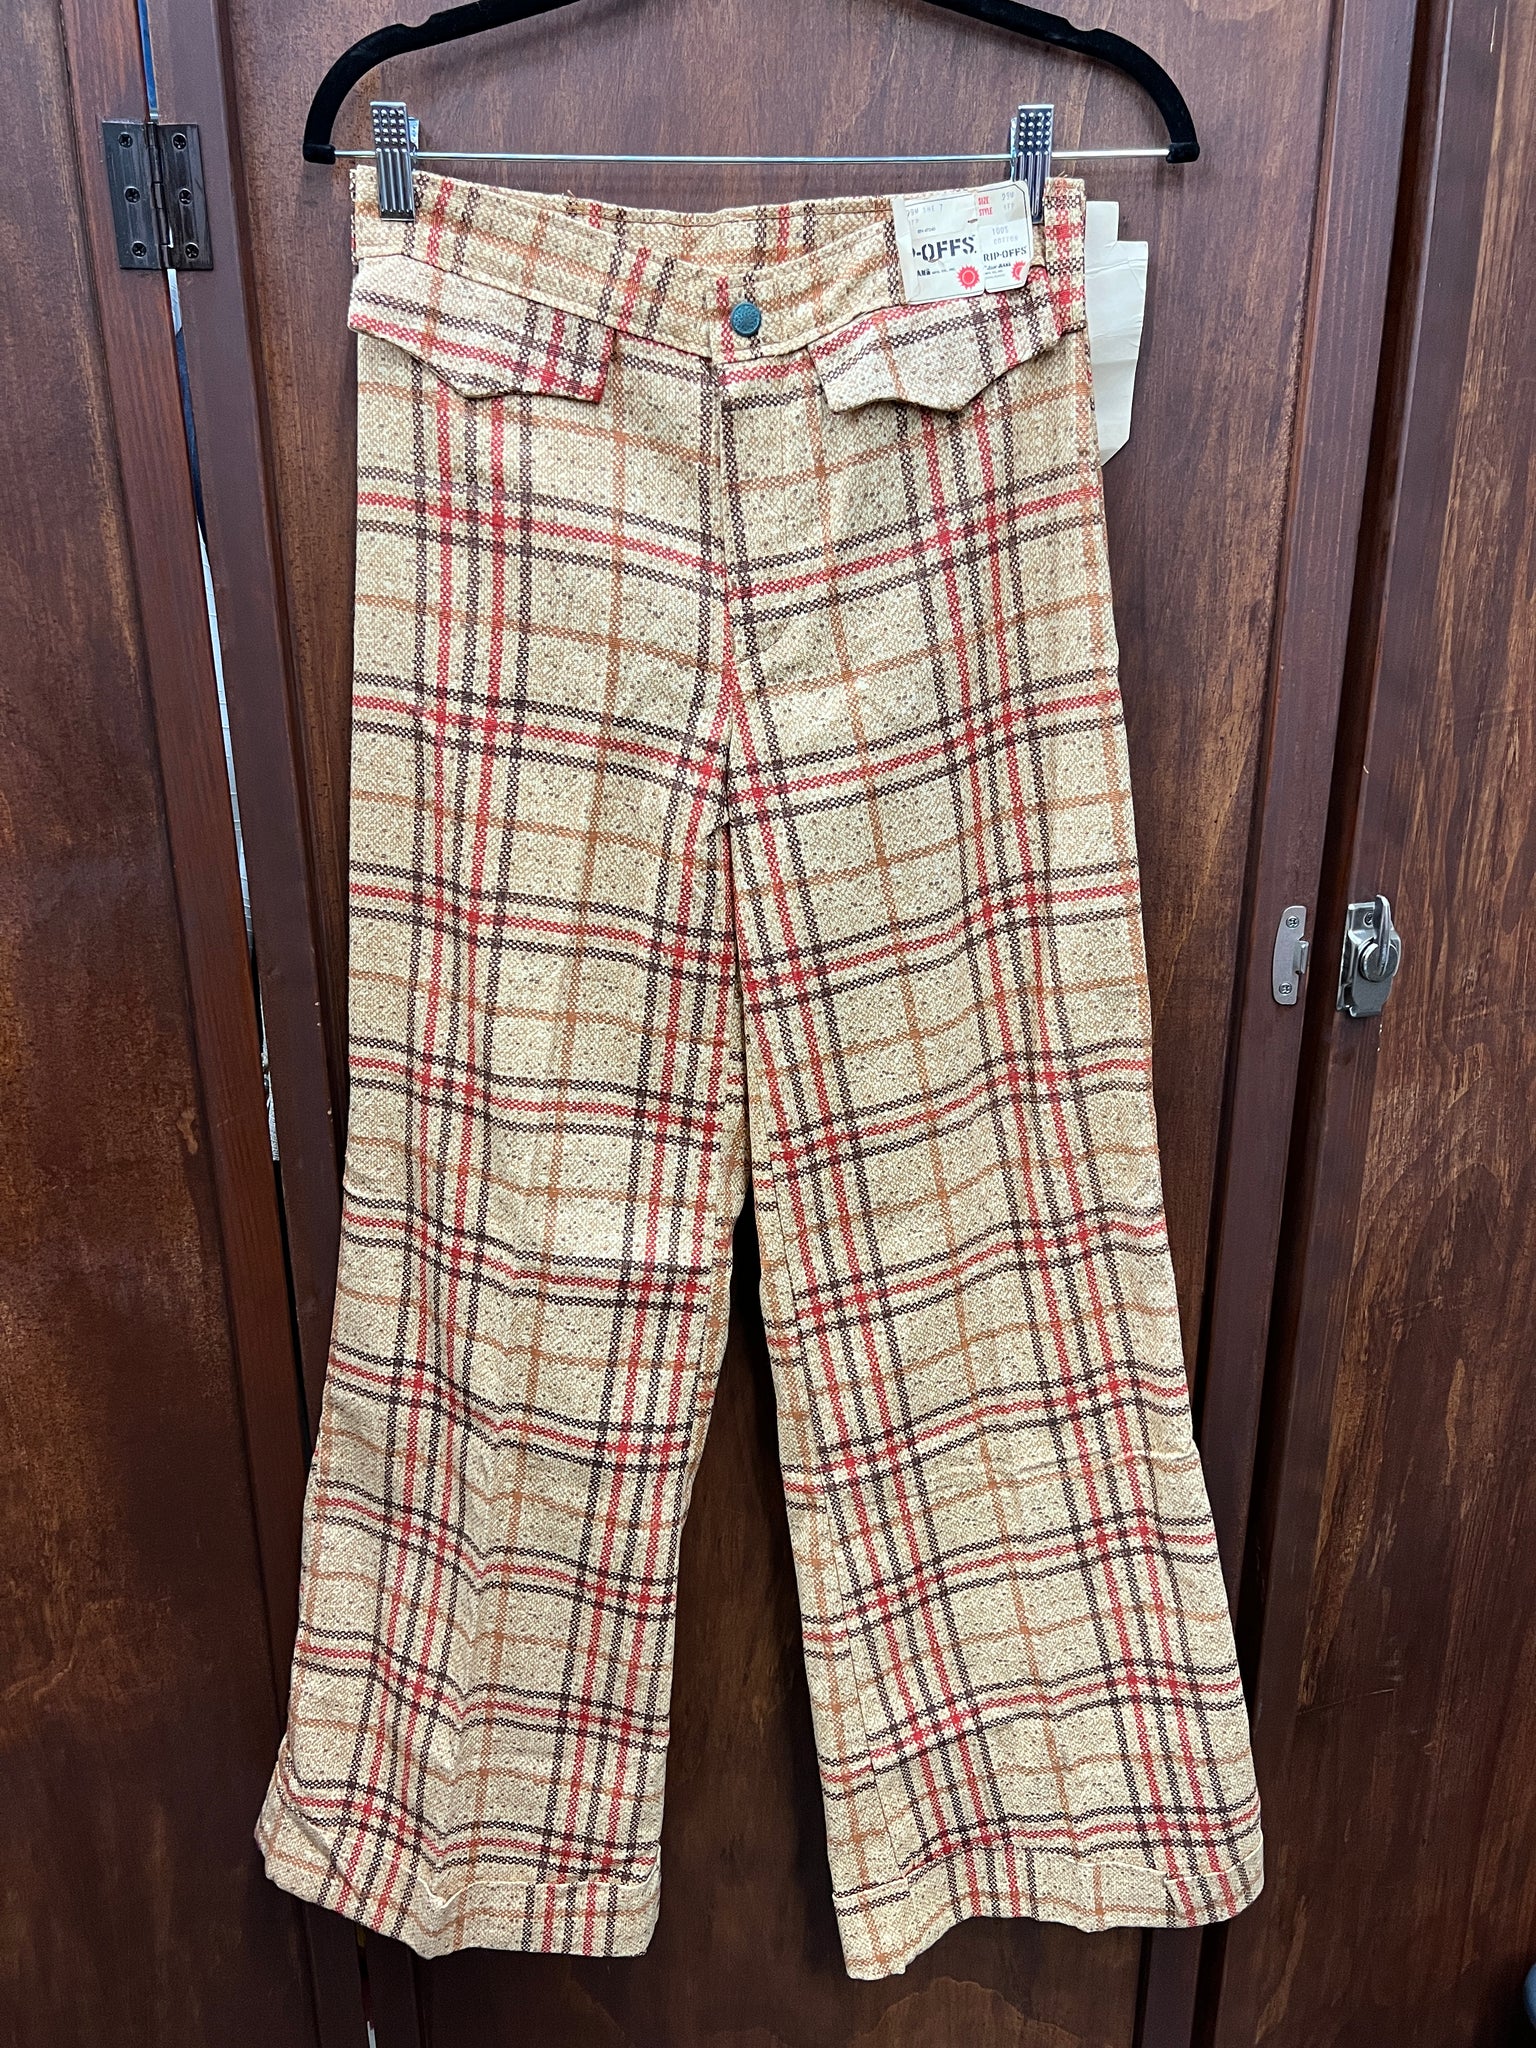 1970s PANTS- Rip-Offs brown plaid bellbottom deadstock